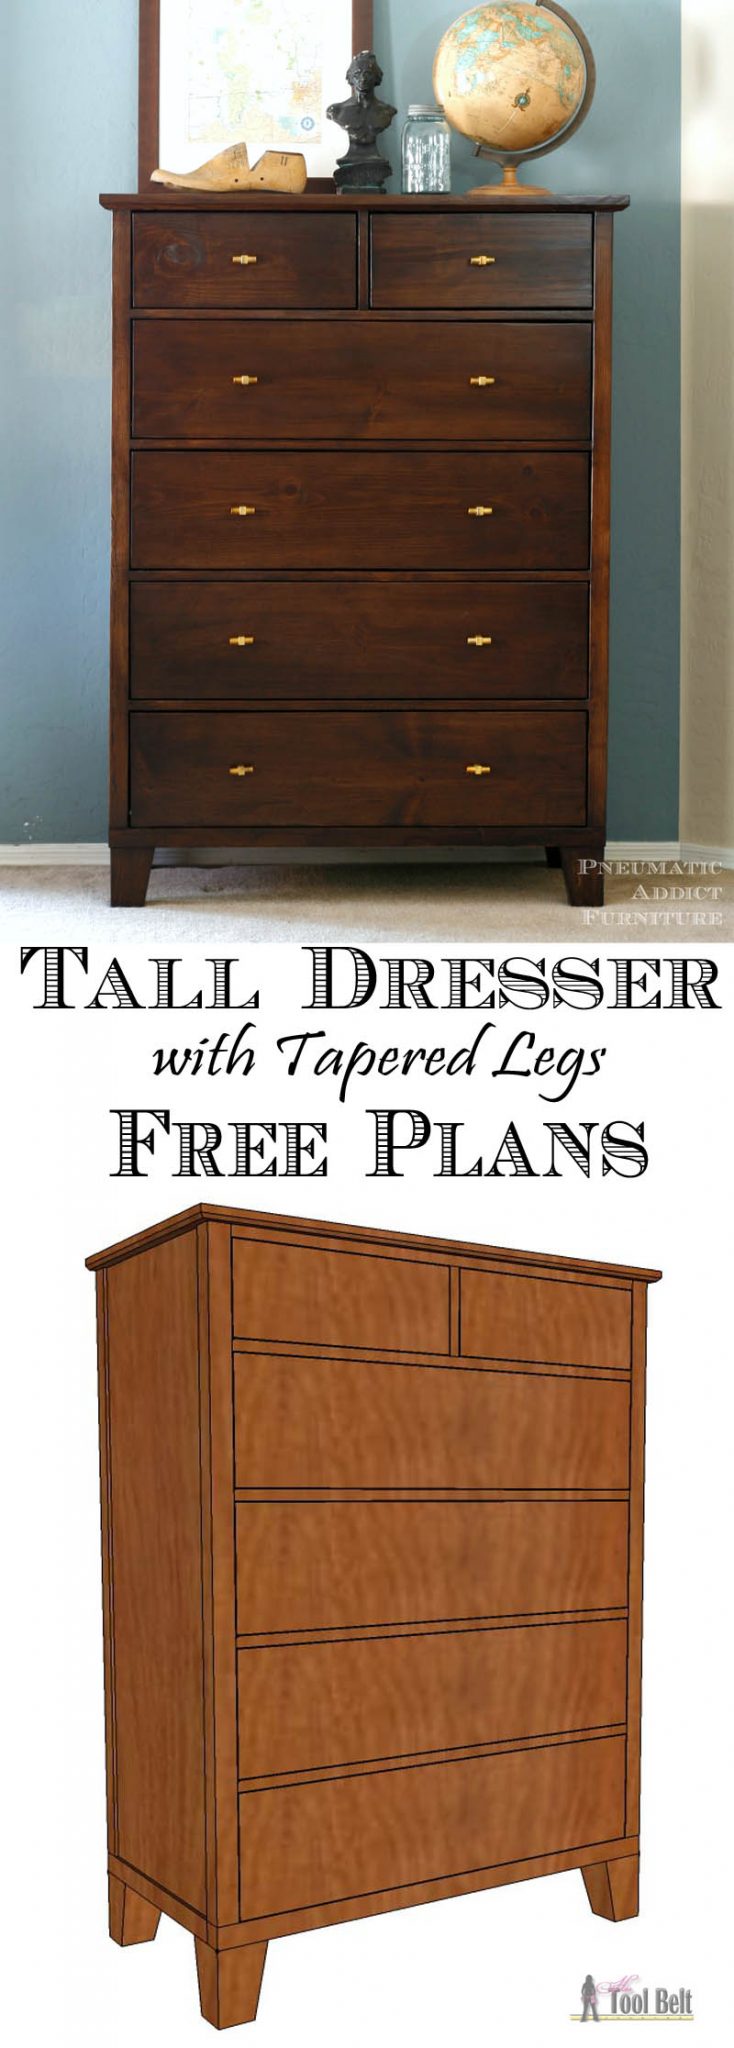 Tall Dresser With Tapered Legs Her Tool Belt